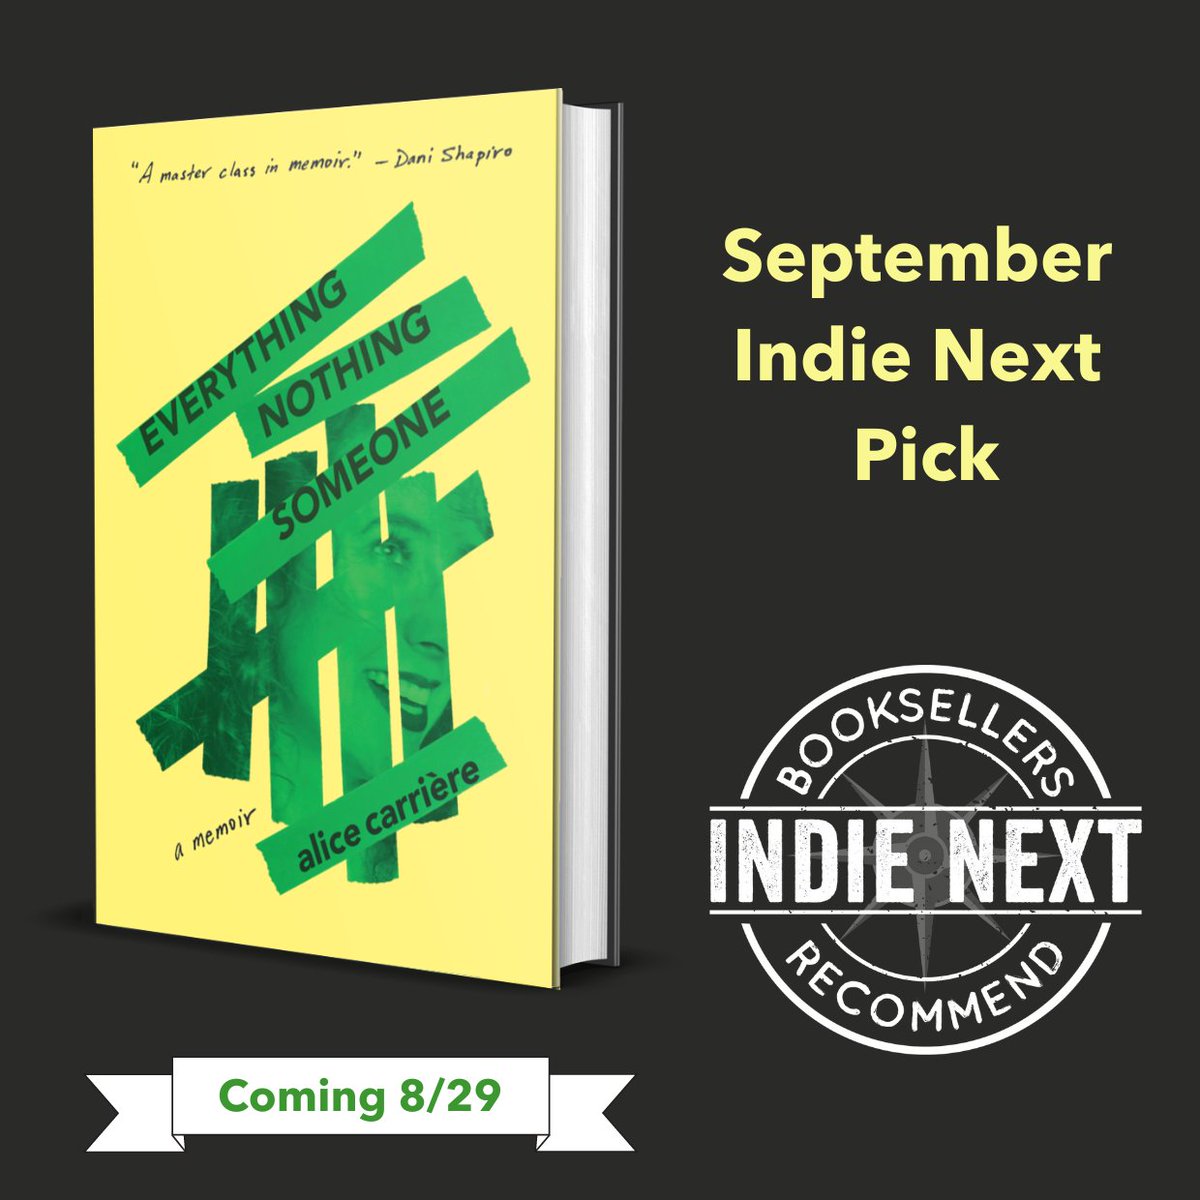 We are so excited that Everything/Nothing/Someone was selected for the September Indie Next List! You can pre-order Alice Carrière’s unforgettable debut memoir from your favorite indie today.